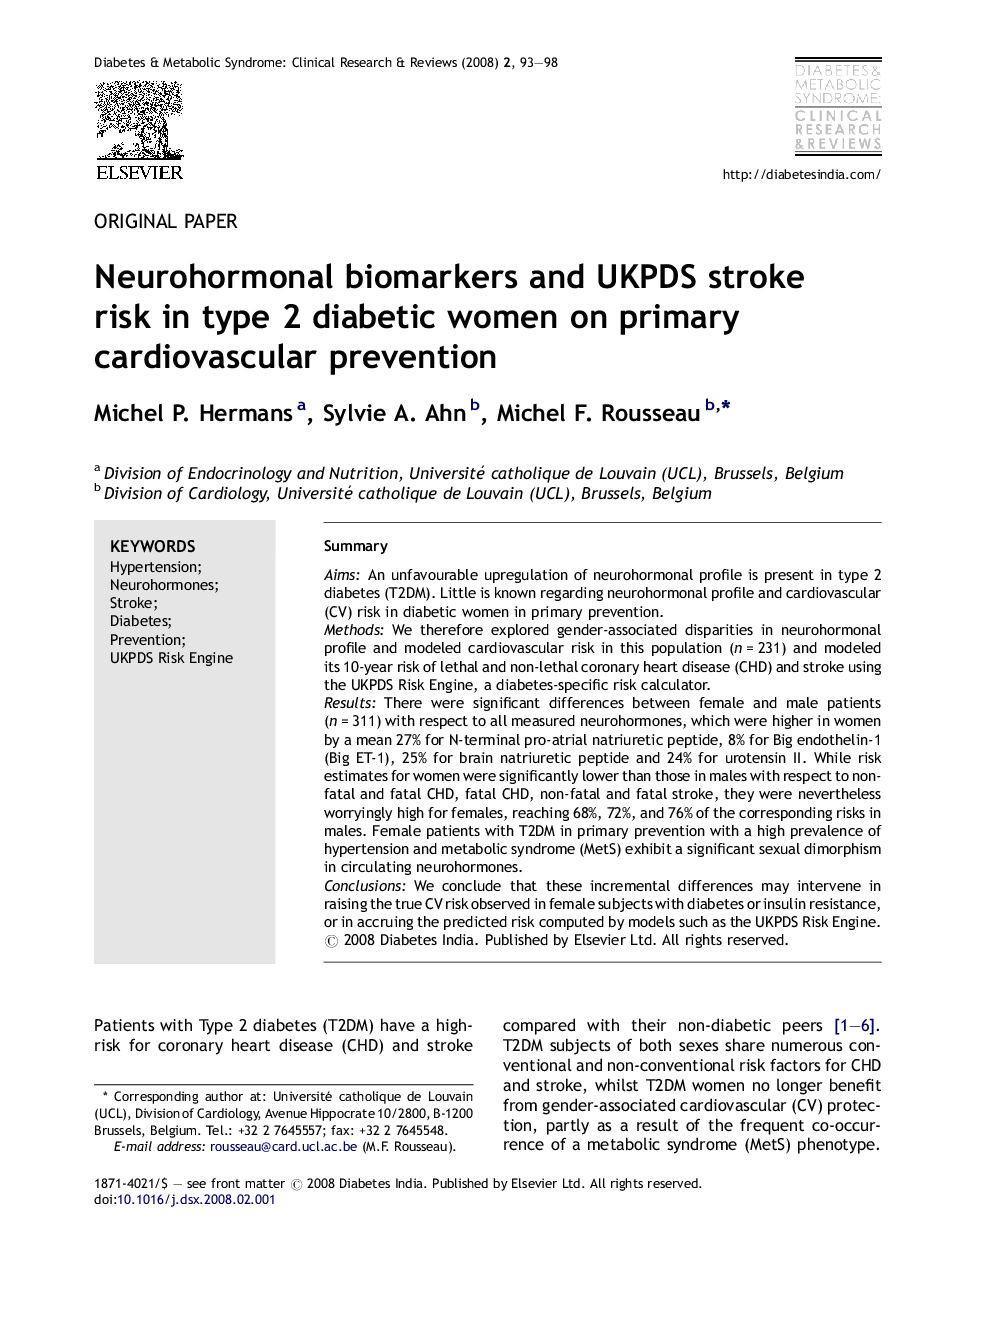 Neurohormonal biomarkers and UKPDS stroke risk in type 2 diabetic women on primary cardiovascular prevention